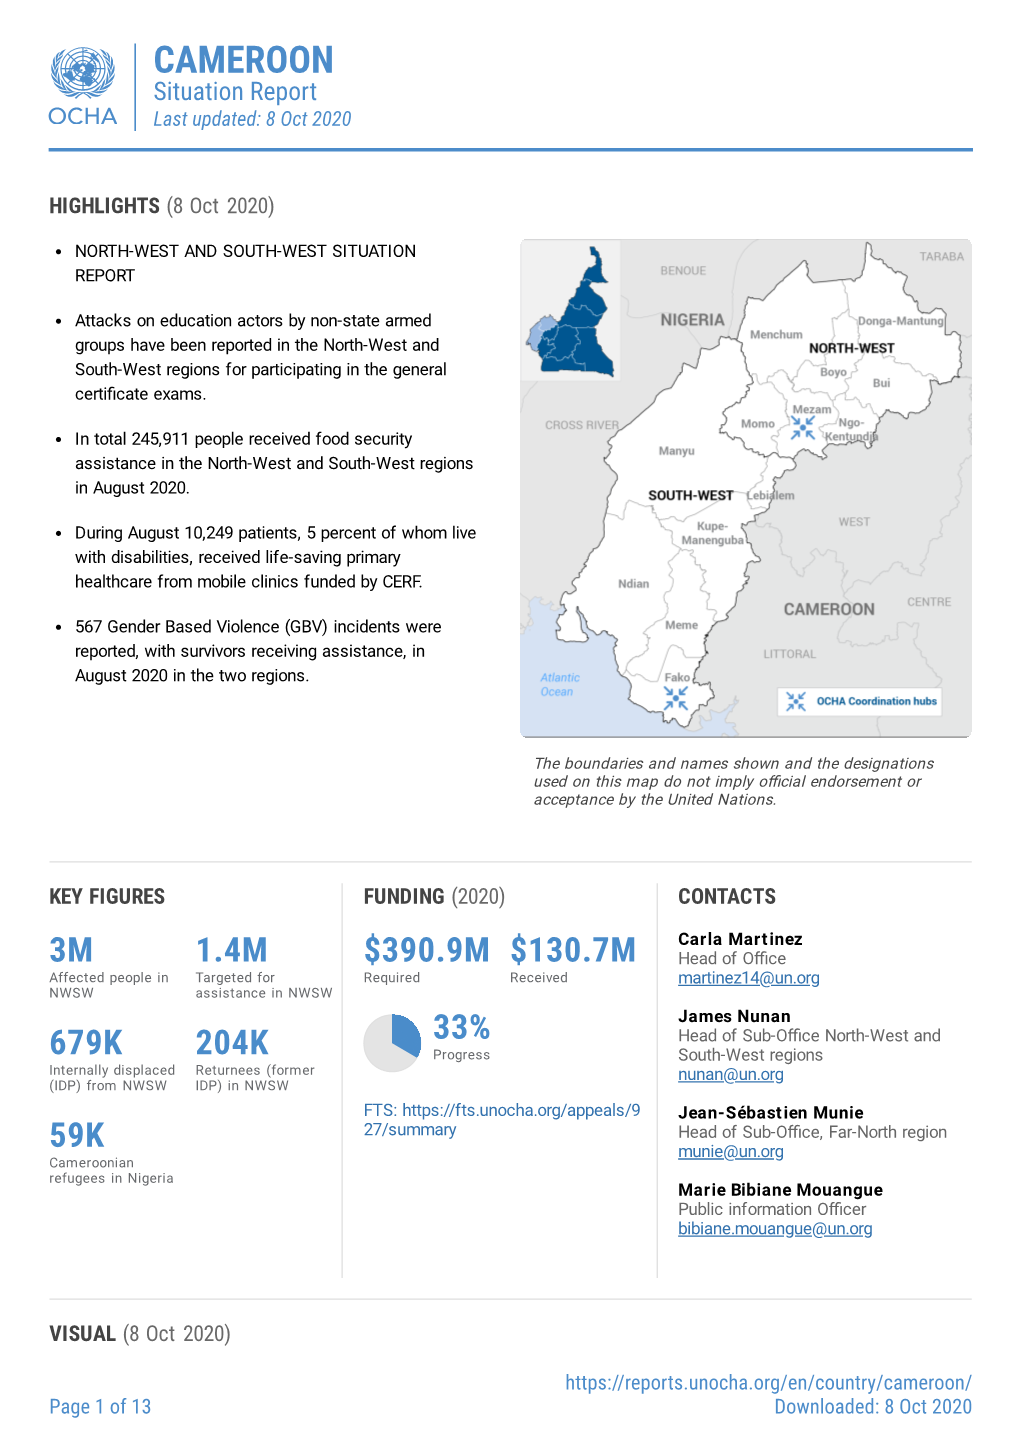 CAMEROON Situation Report Last Updated: 8 Oct 2020